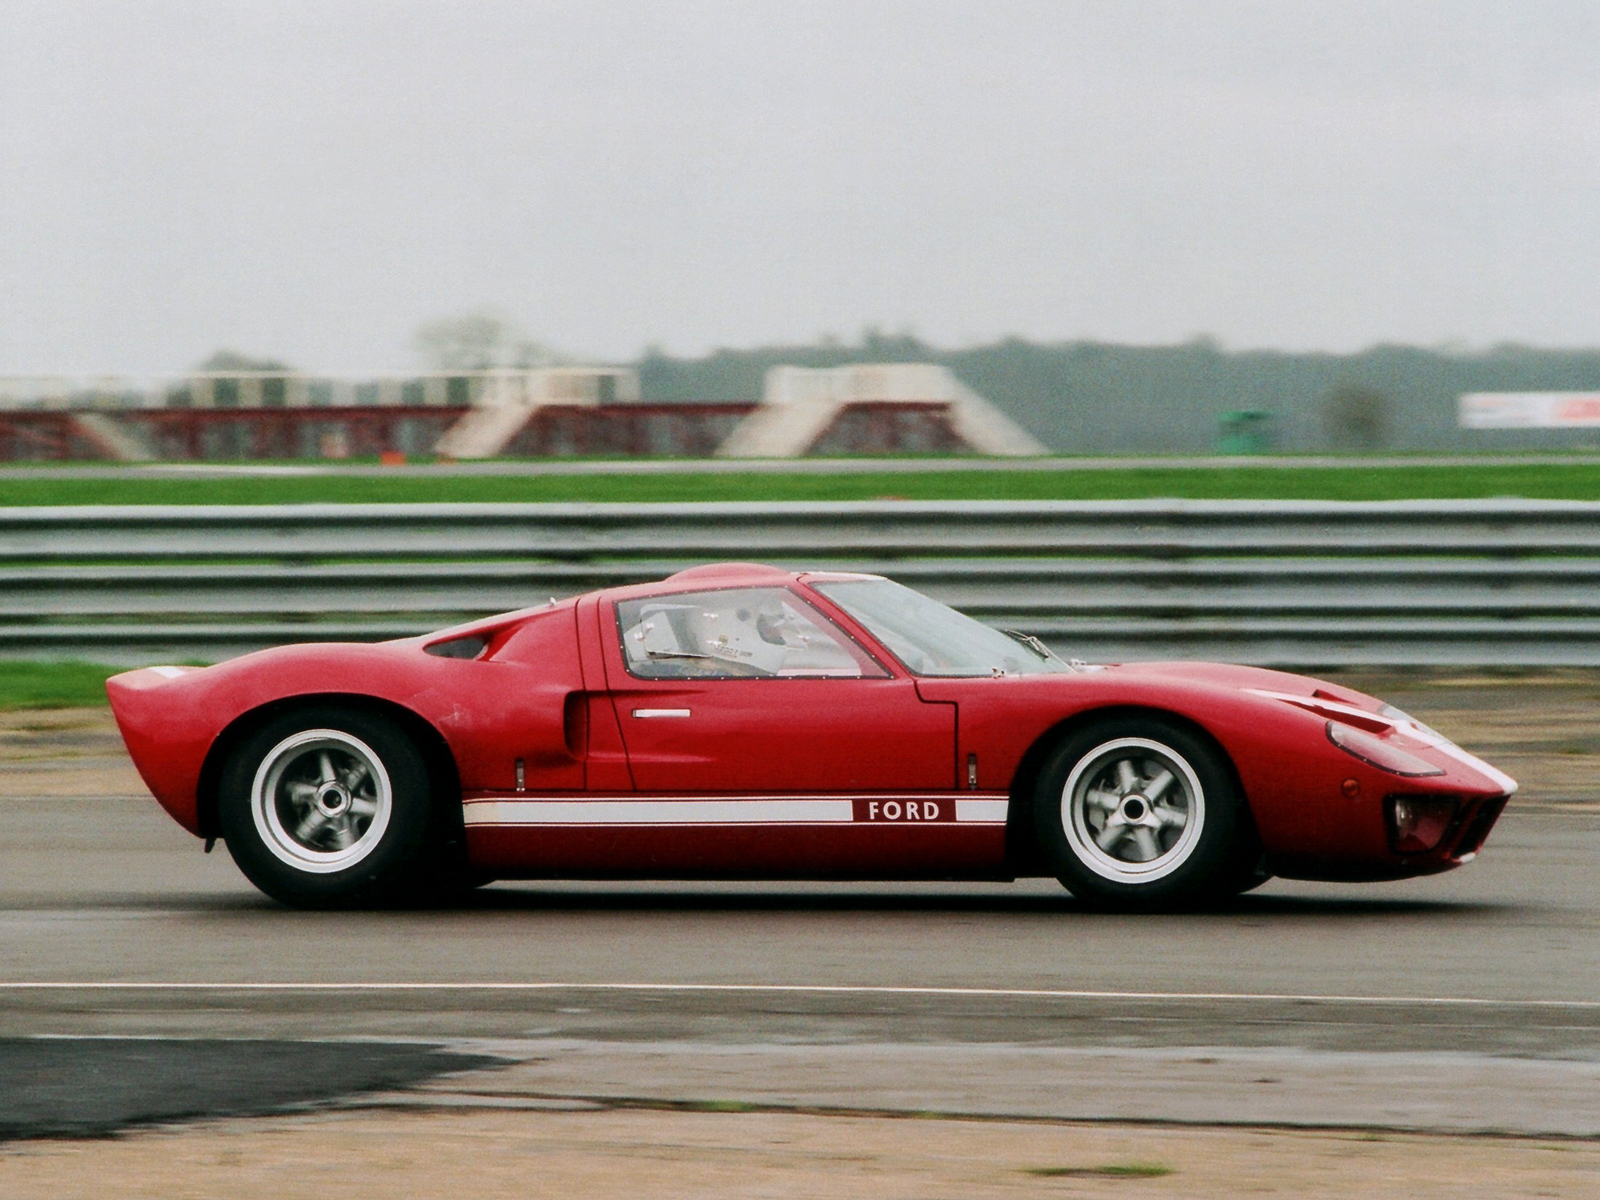 1965, Ford, Gt40, Mkii, Supercar, Race, Racing, Classic, G t, Fs Wallpaper